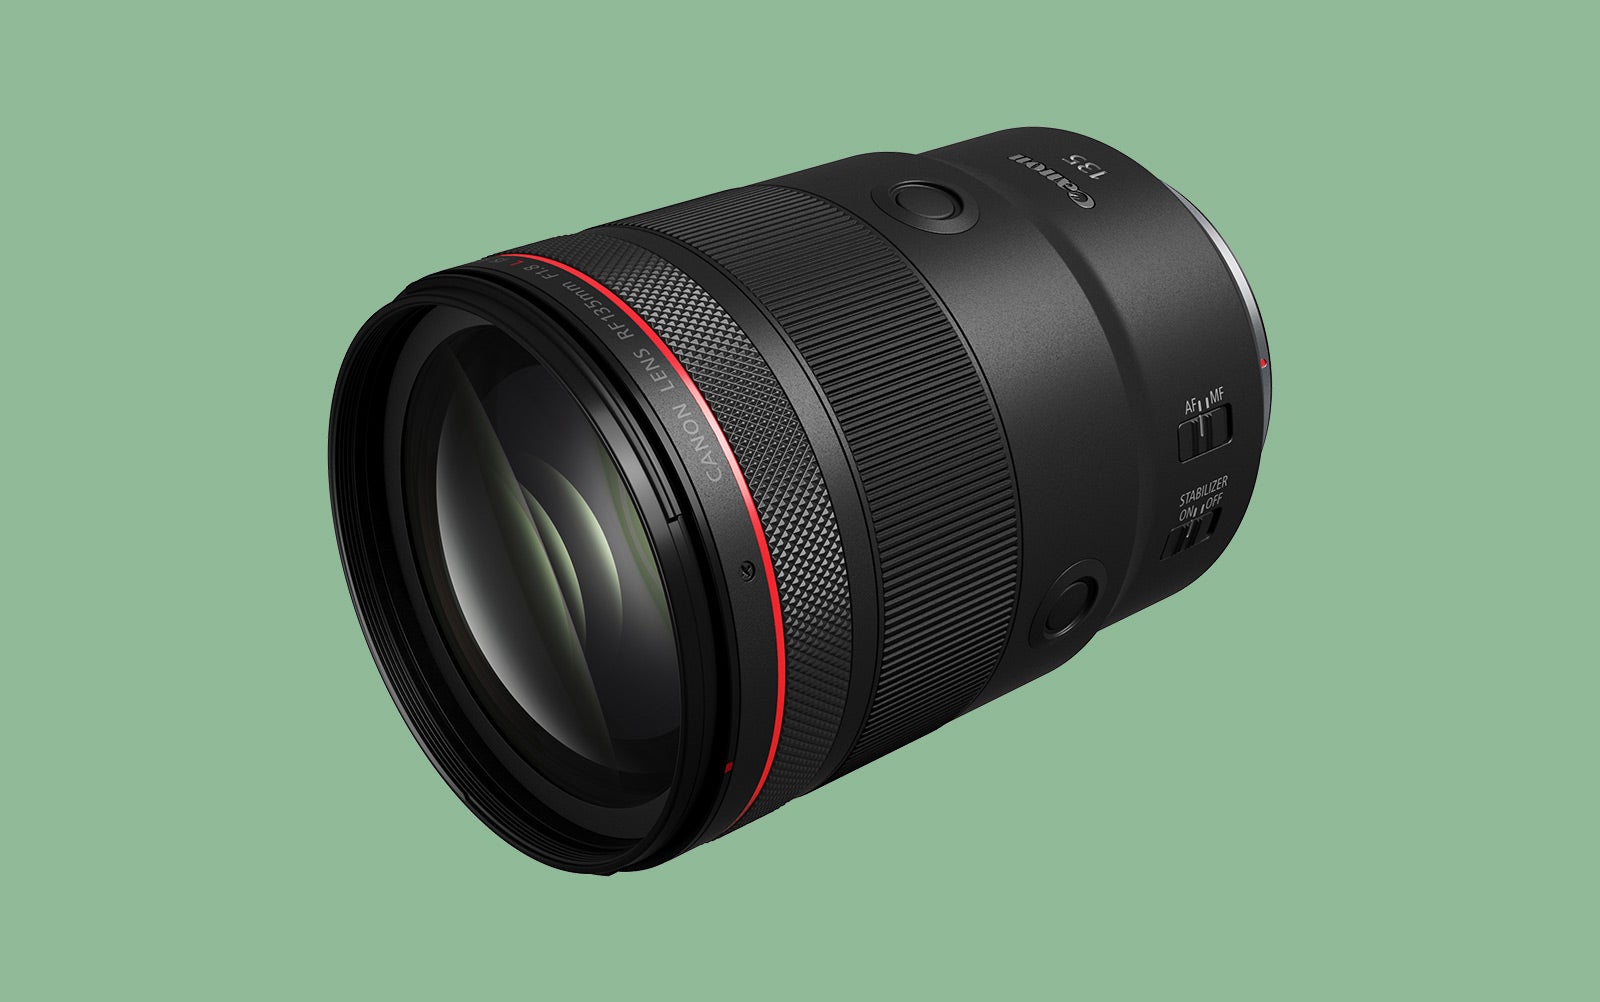 Canon has announced the.RF 135mm F1.8 L IS USM lens.